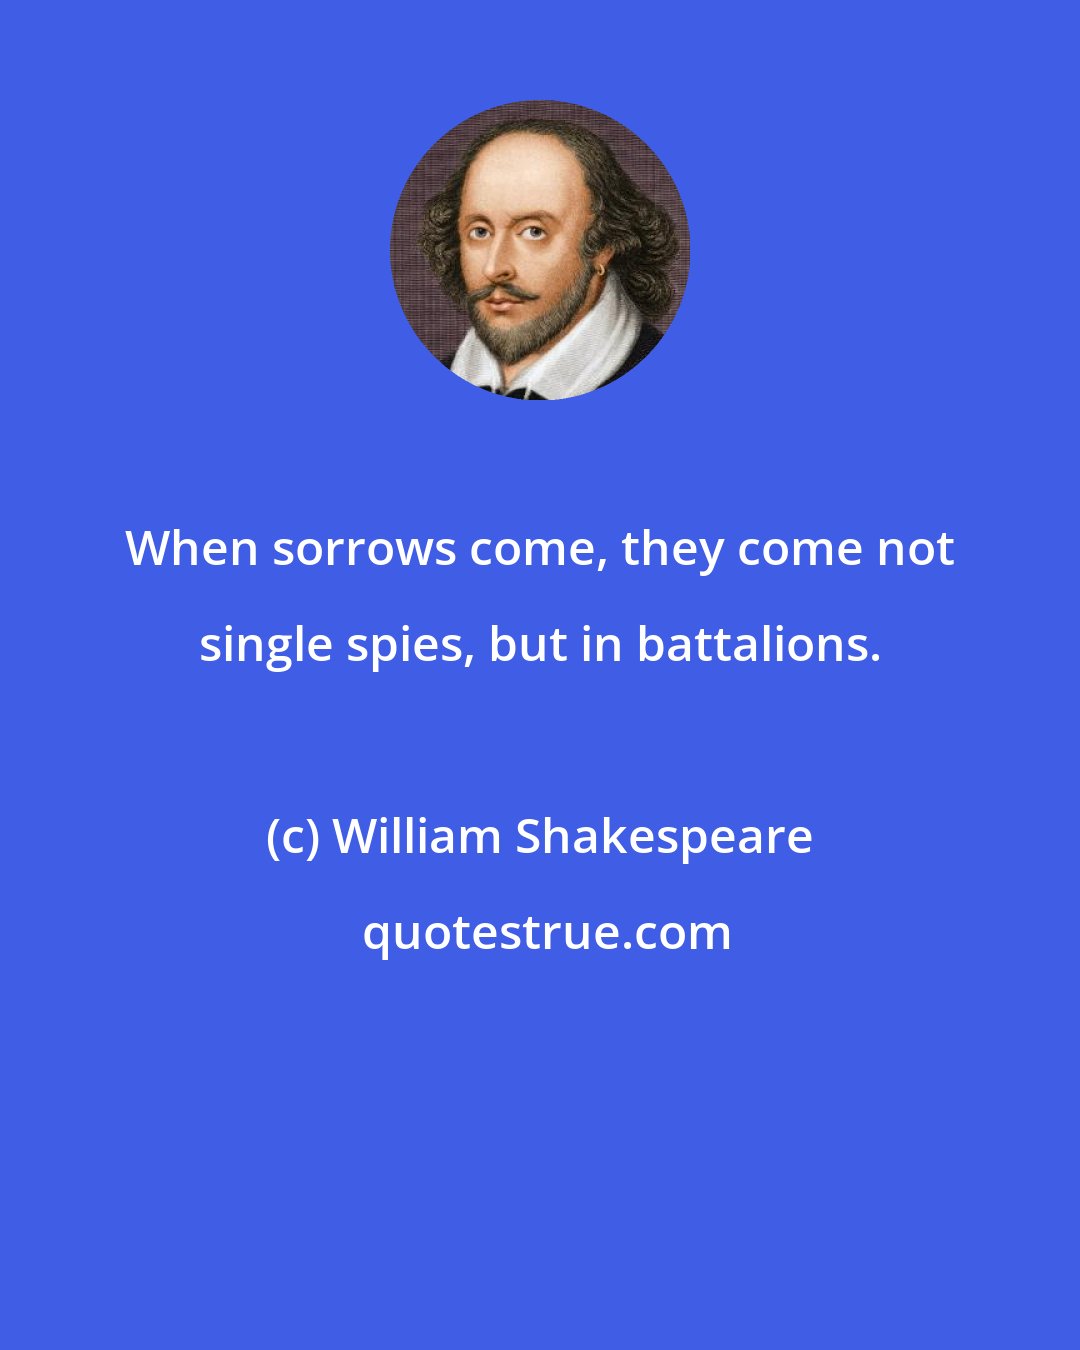 William Shakespeare: When sorrows come, they come not single spies, but in battalions.